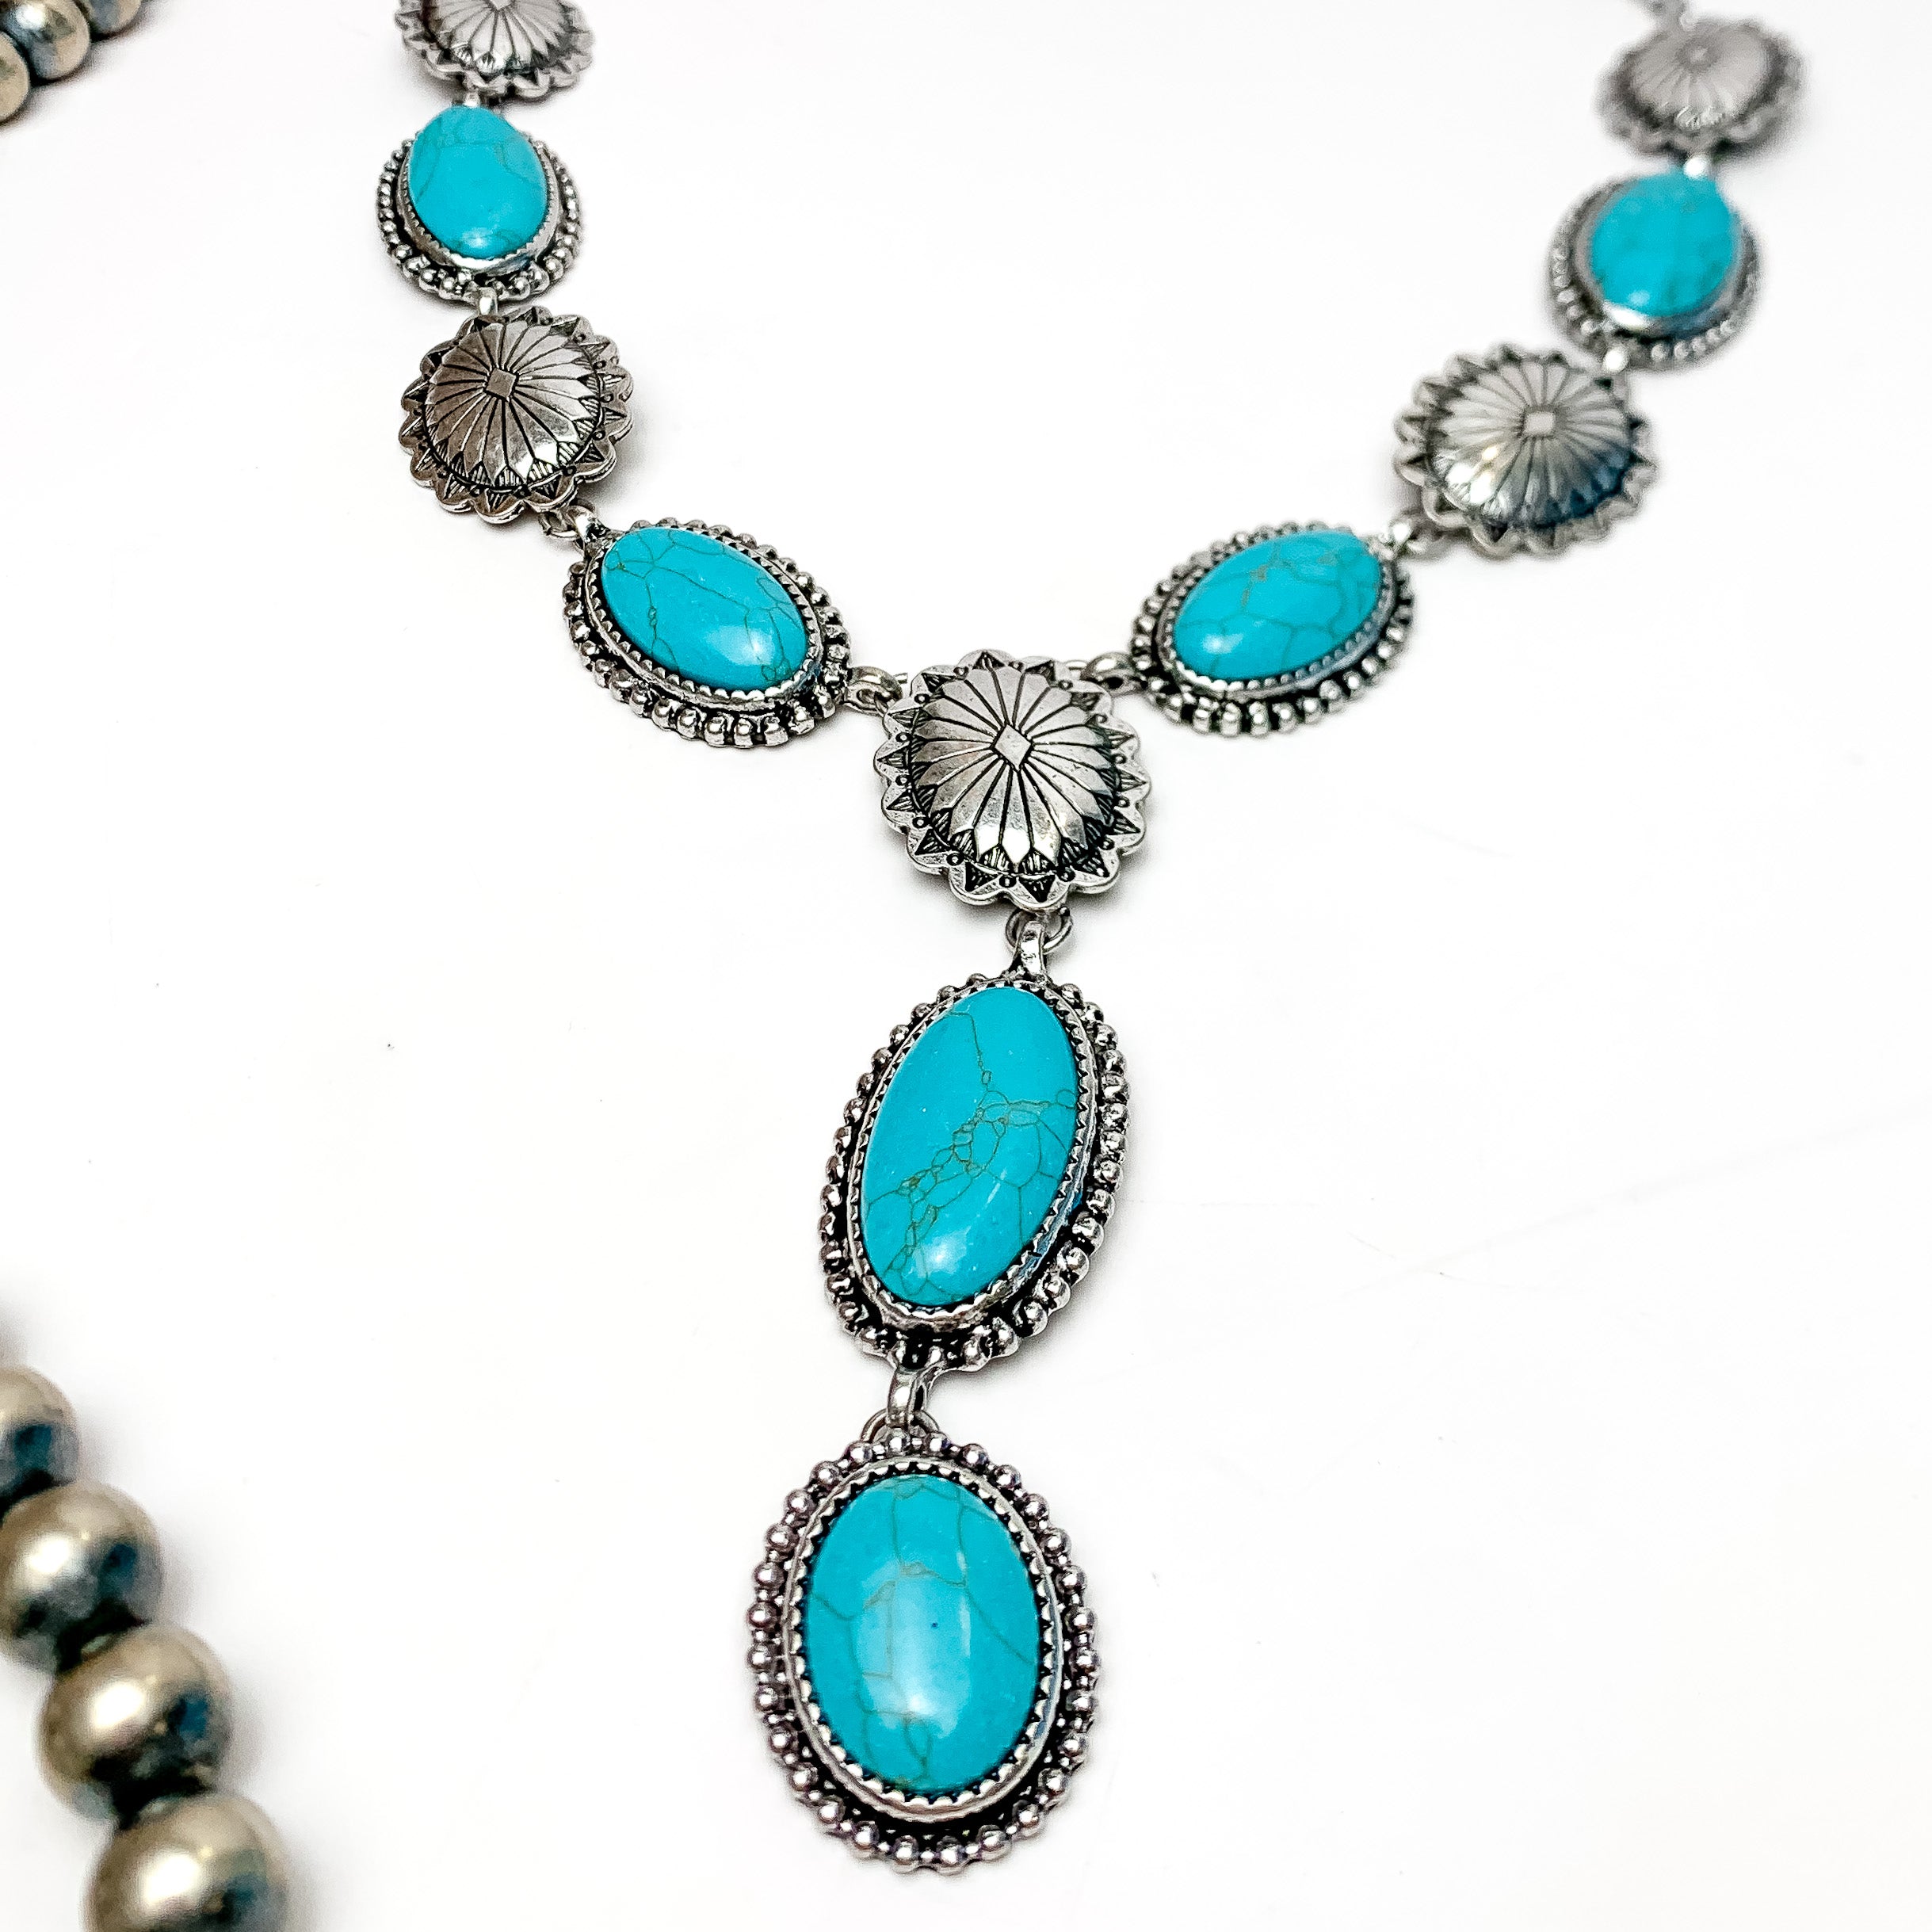 Western Oval Turquoise and Silver Tone Y Necklace - Giddy Up Glamour Boutique